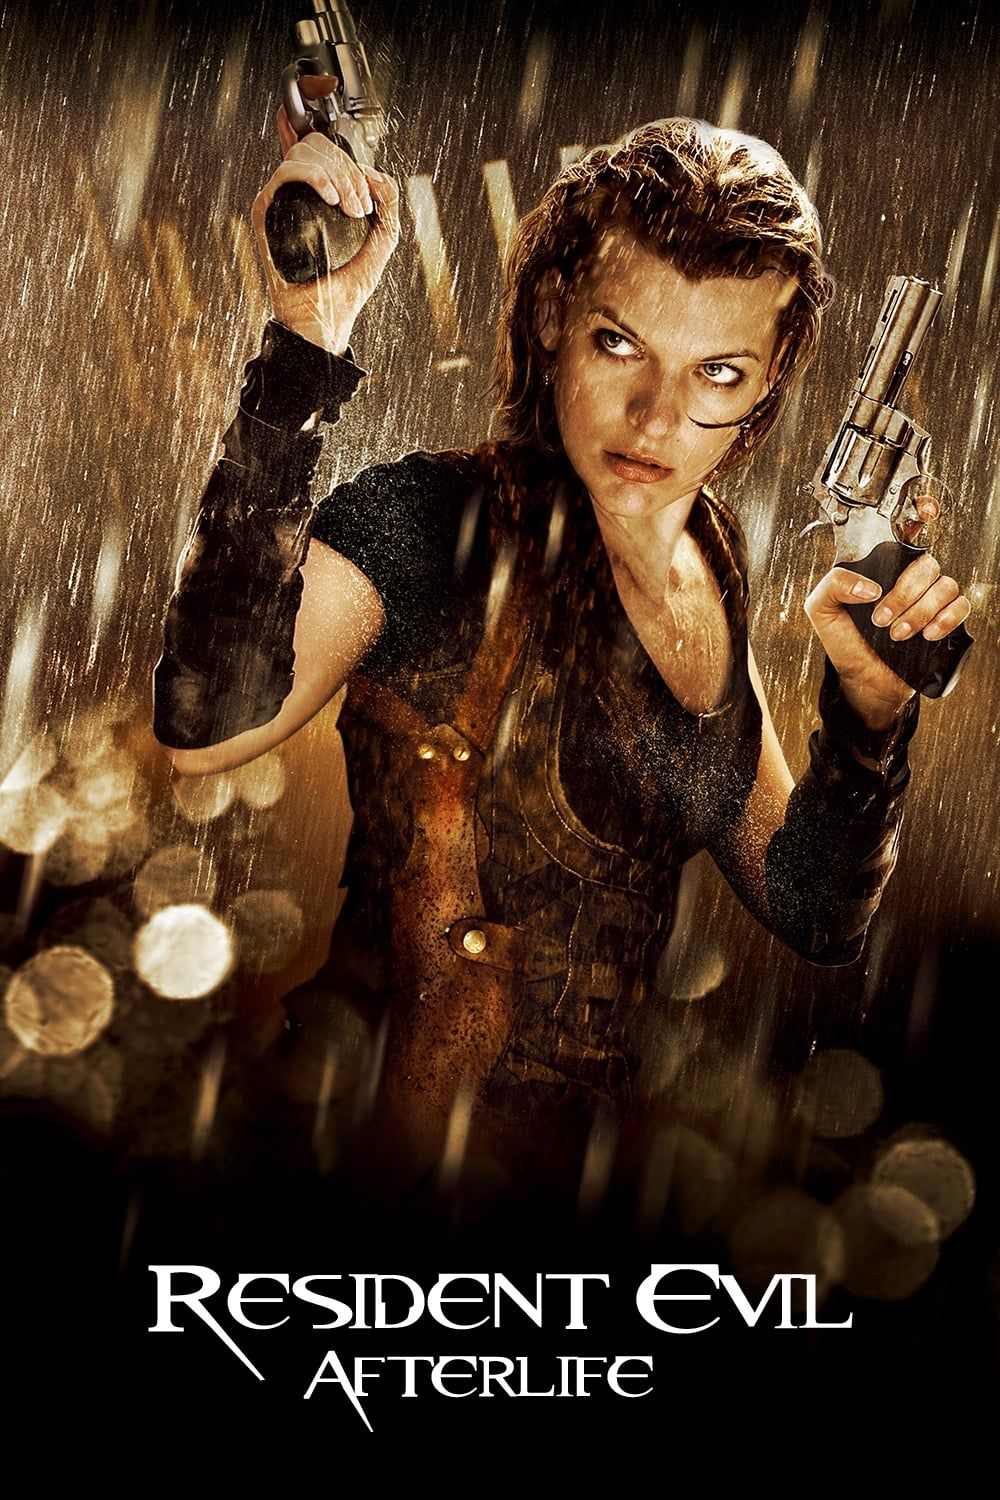 Resident Evil Movies with Alice Anderson » MiscRave